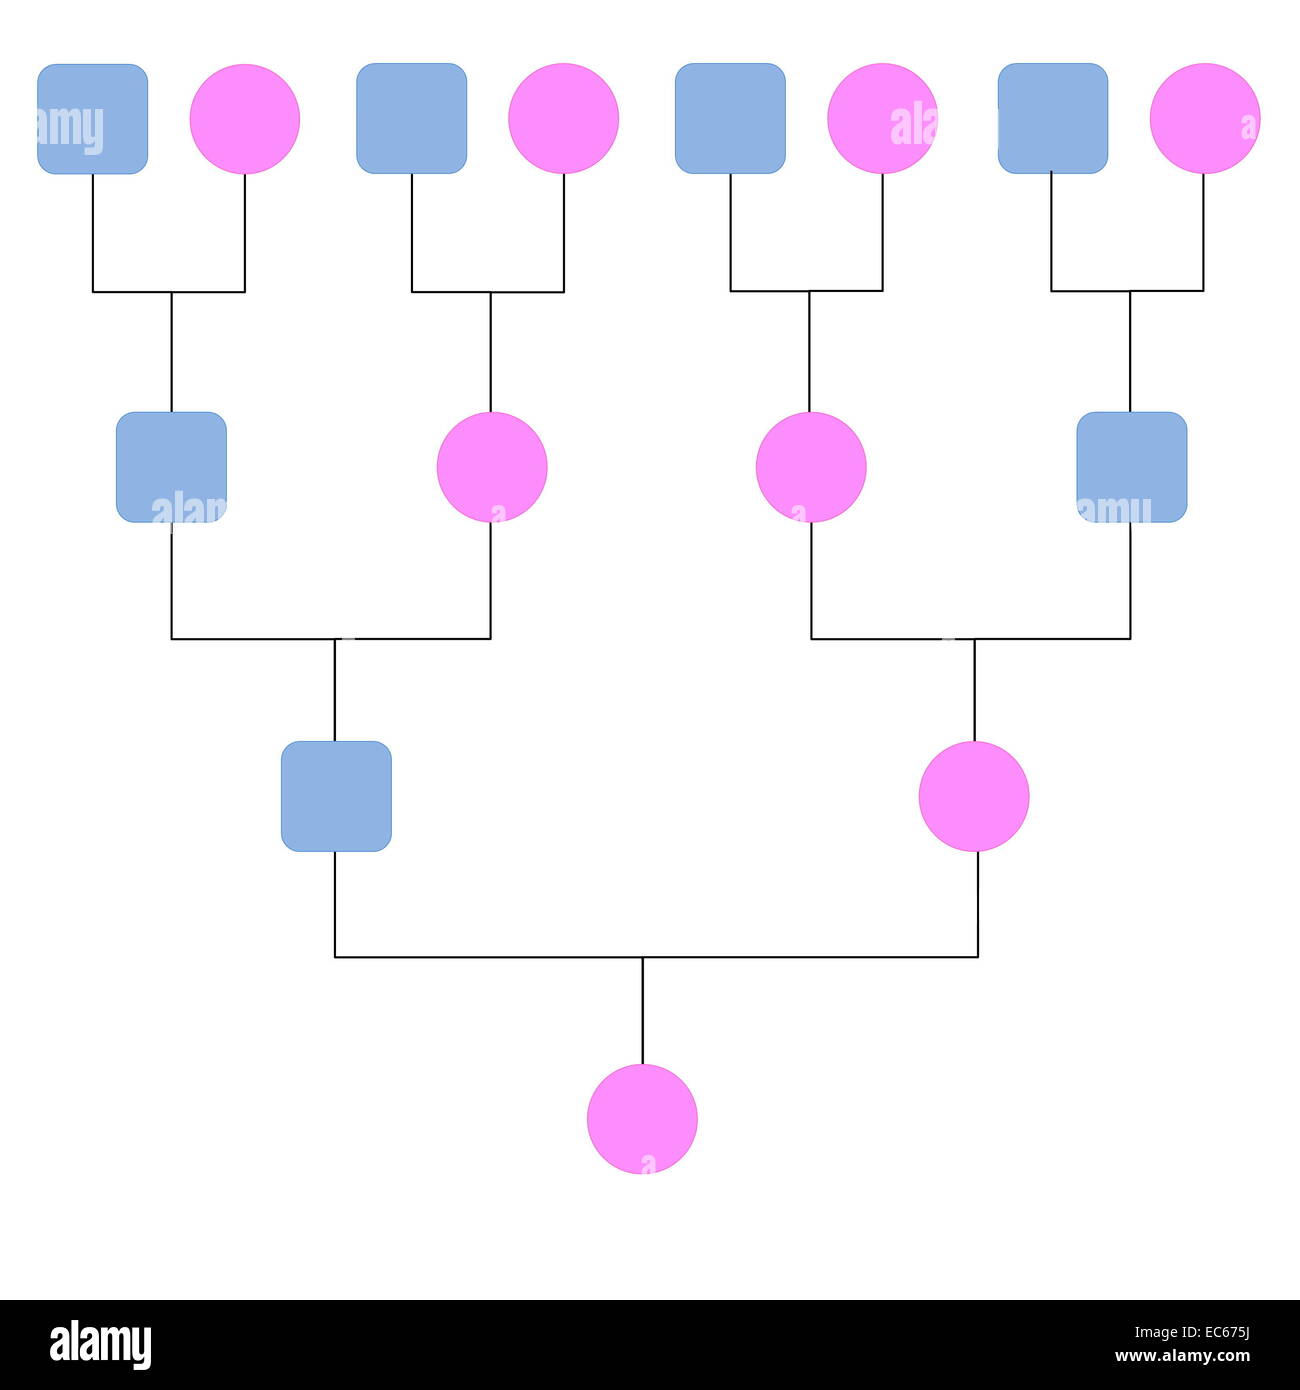 Symbolic family tree with pink females and blue males Stock Photo